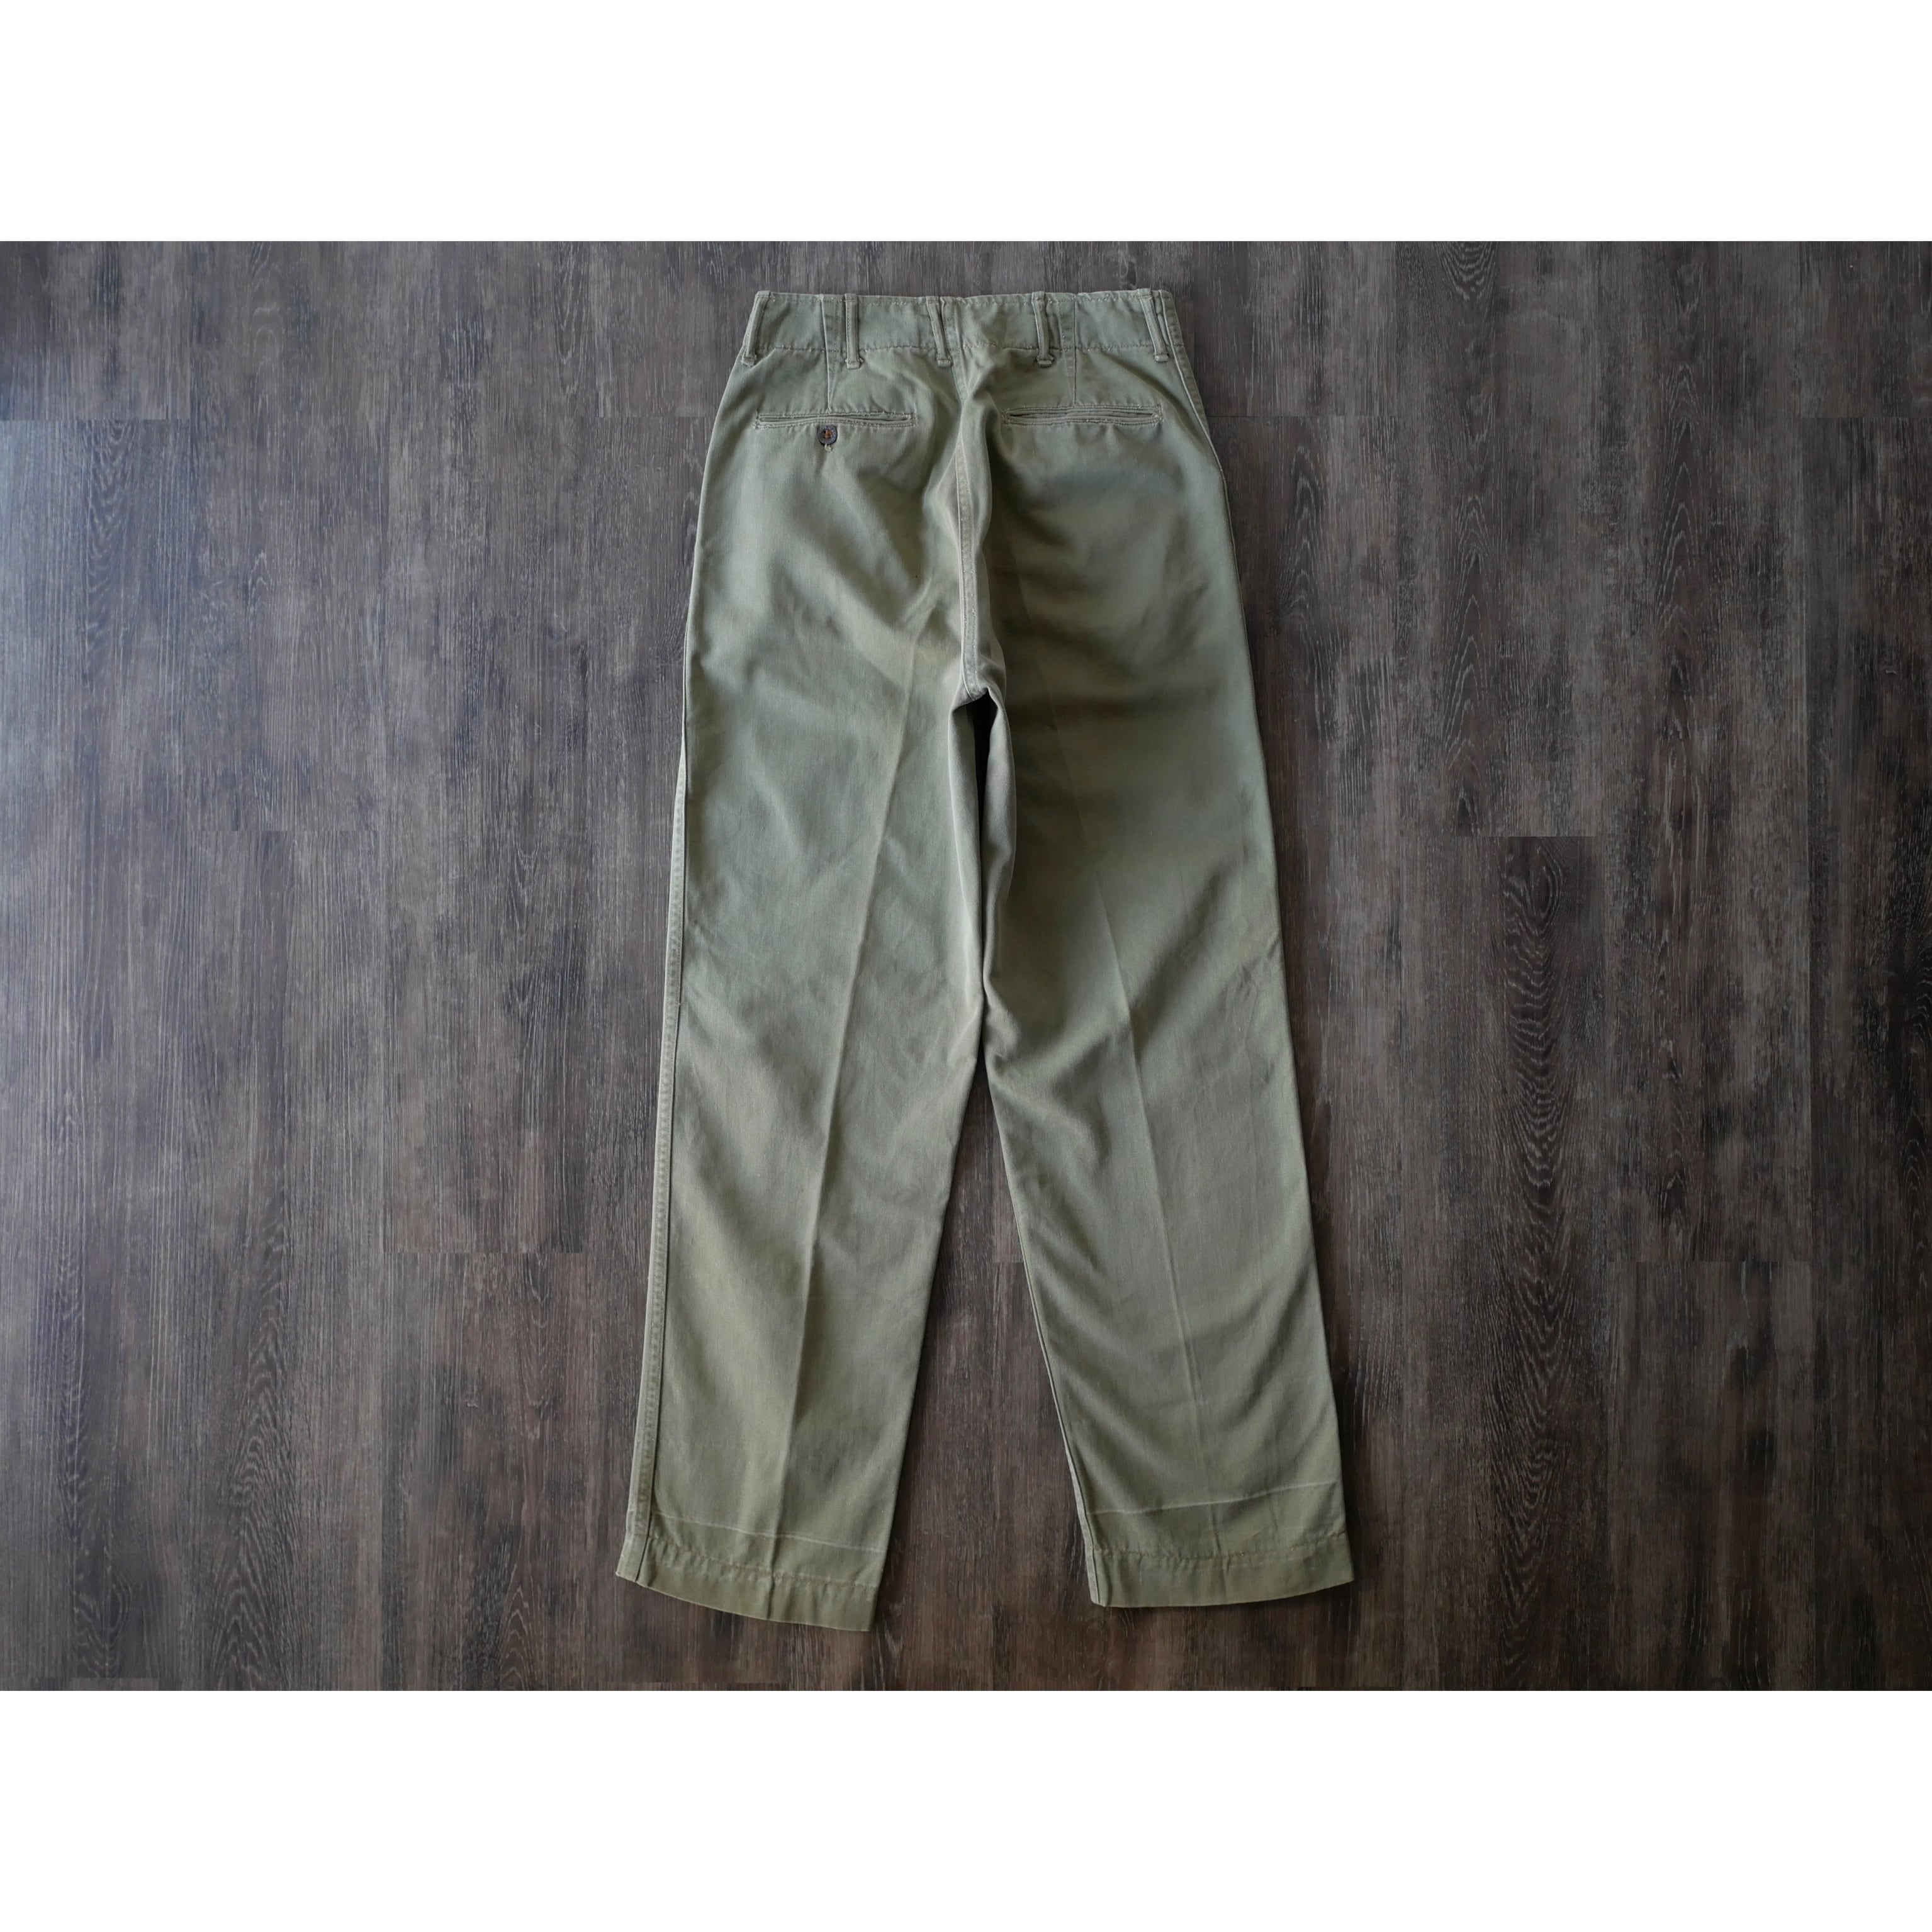 50s- bsa vintage cotton twill trousers olive green ボーイスカウト 